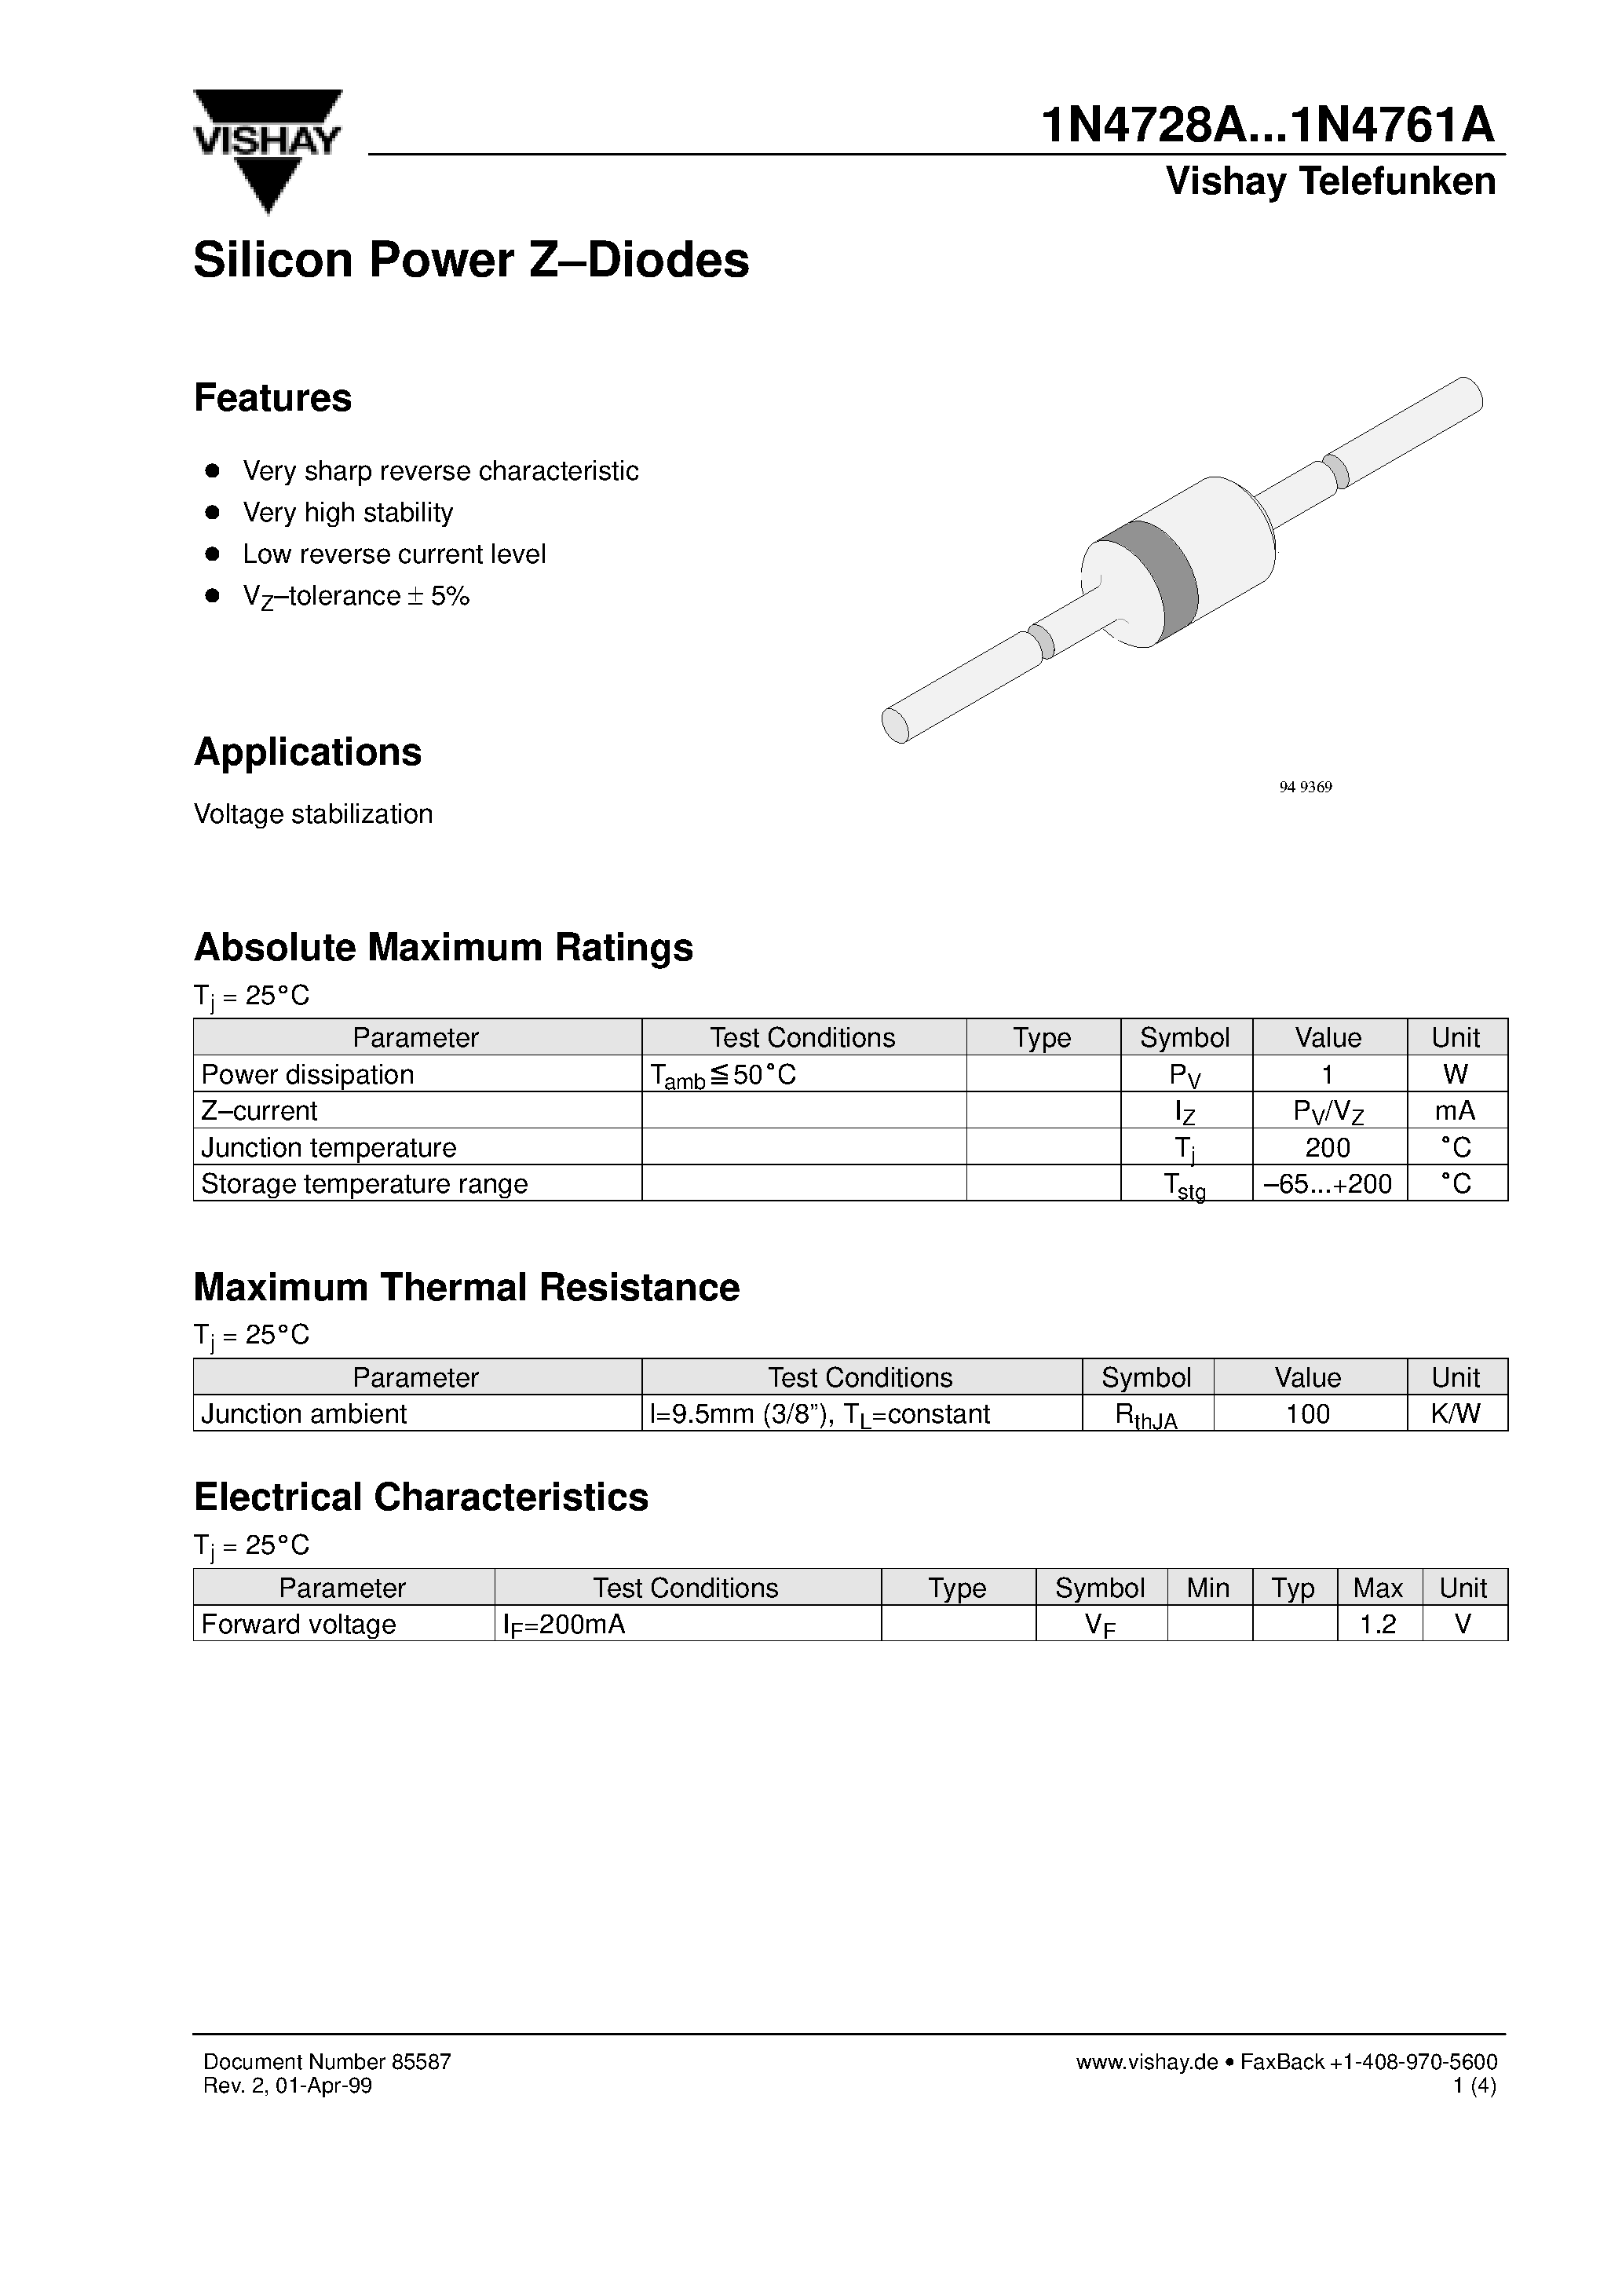 Даташит 1N4761A - Silicon Power Z-Diodes страница 1